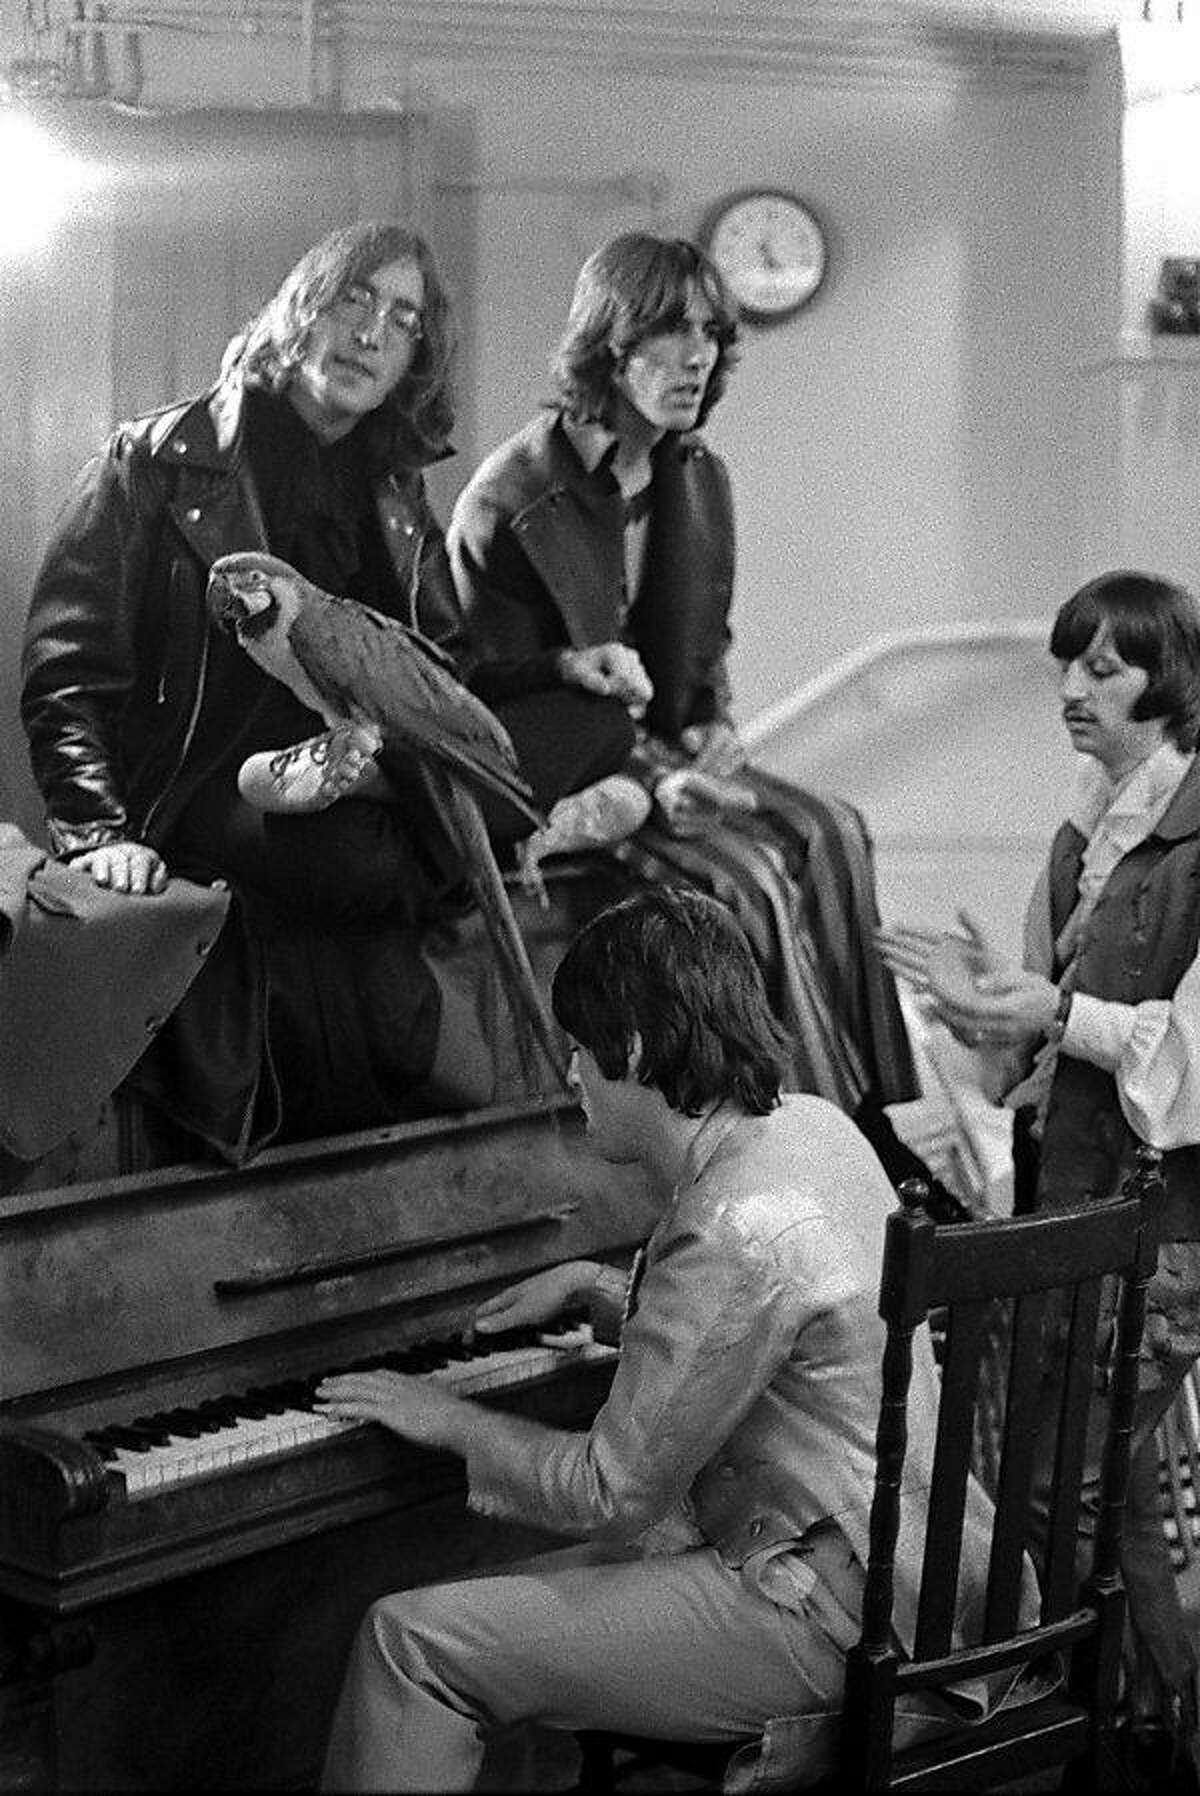 Goldblatt: "They had recently recorded �Hey Jude� and so Paul is playing �Hey Jude,� and they�re all singing, and the parrot is just a prop that Paul�s girlfriend brought along. She was the prop girl. It was taken in the Mercury Theatre in Notting Hill." Rare Beatles photos at the gallery of the UC Berkeley Graduate School of Business.